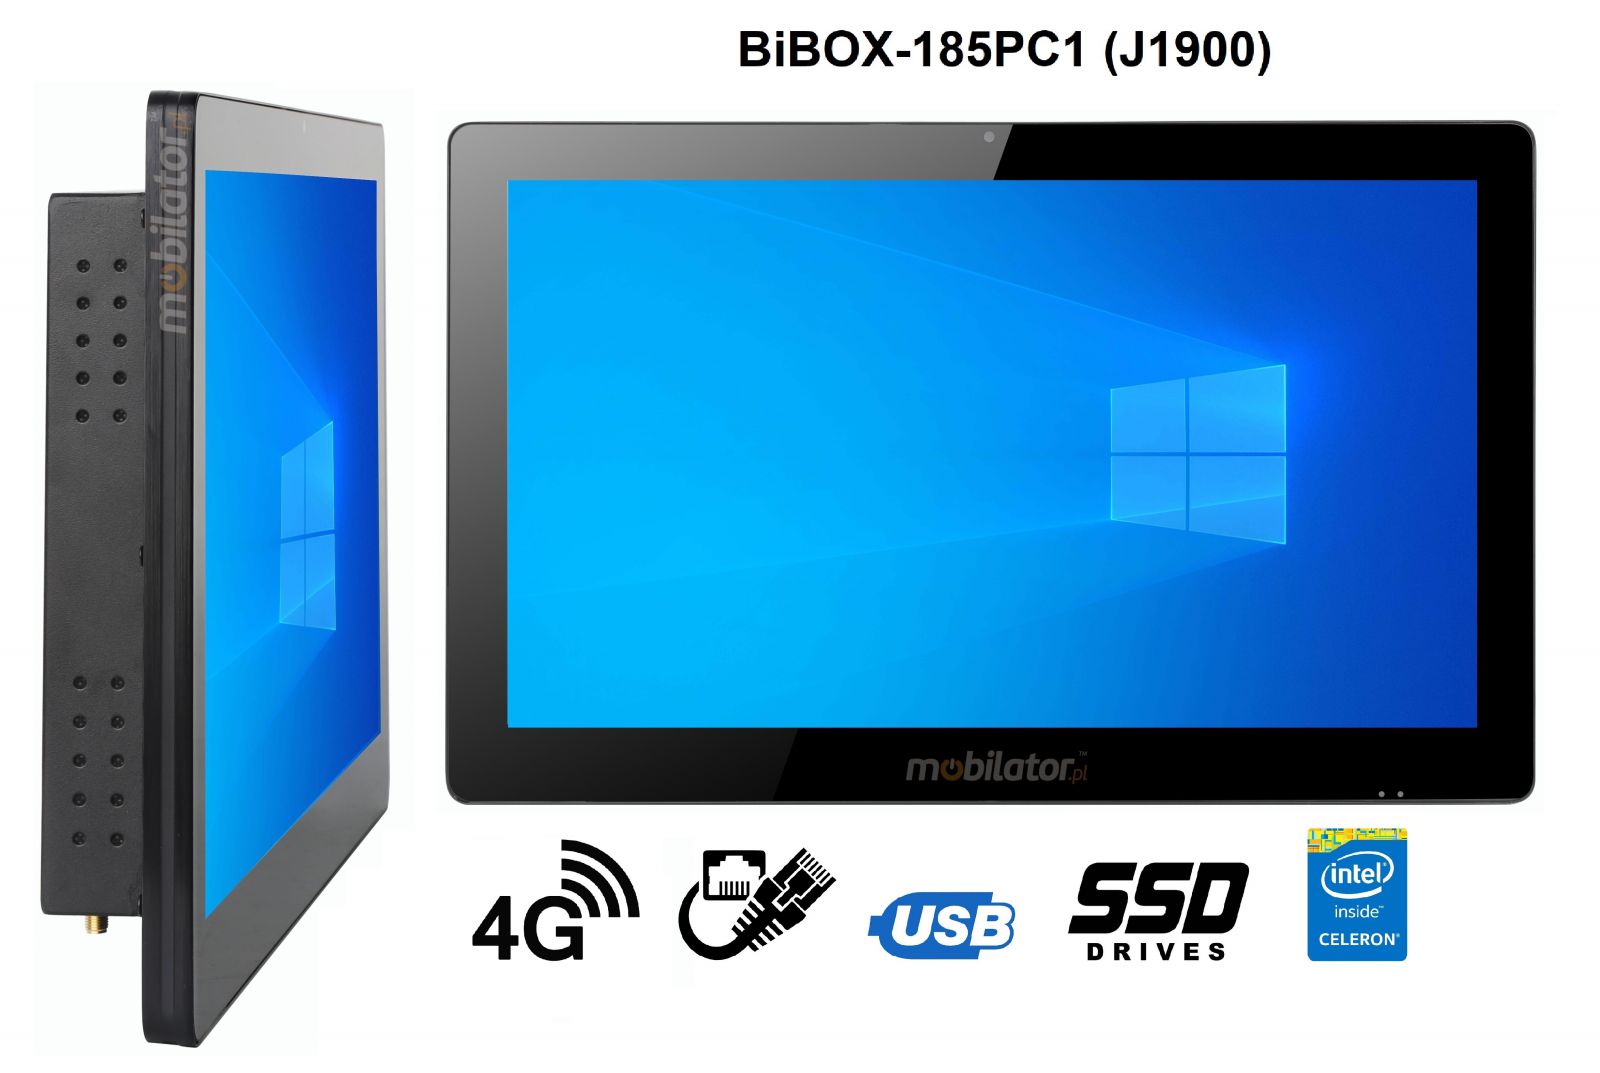 BiBOX-185PC1 (J1900) v.4 - Robust computer panel with IP65 (waterproof and dustproof screen), 256 GB SSD, 4G and WiFi